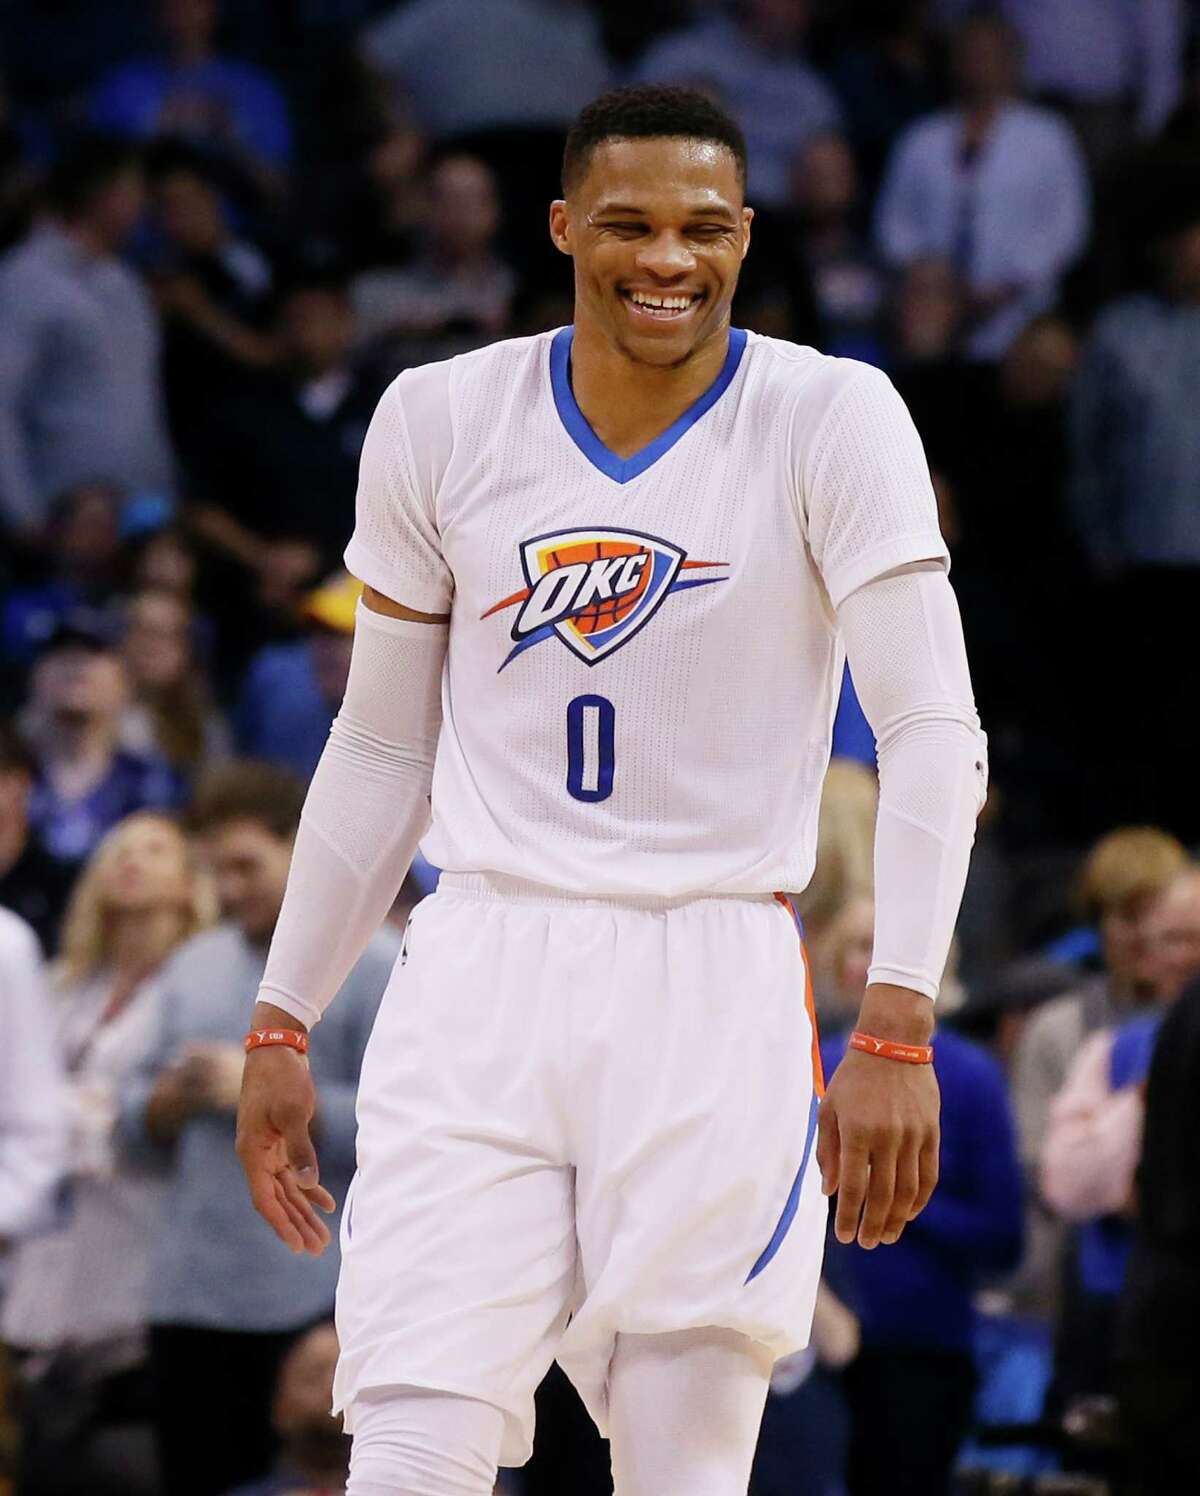 Oklahoma City Thunder guard Russell Westbrook (0) laughs in the fourth quarter of an NBA basketball game against the Dallas Mavericks in Oklahoma City, Thursday, Jan. 26, 2017. Oklahoma City won 109-98. (AP Photo/Sue Ogrocki)